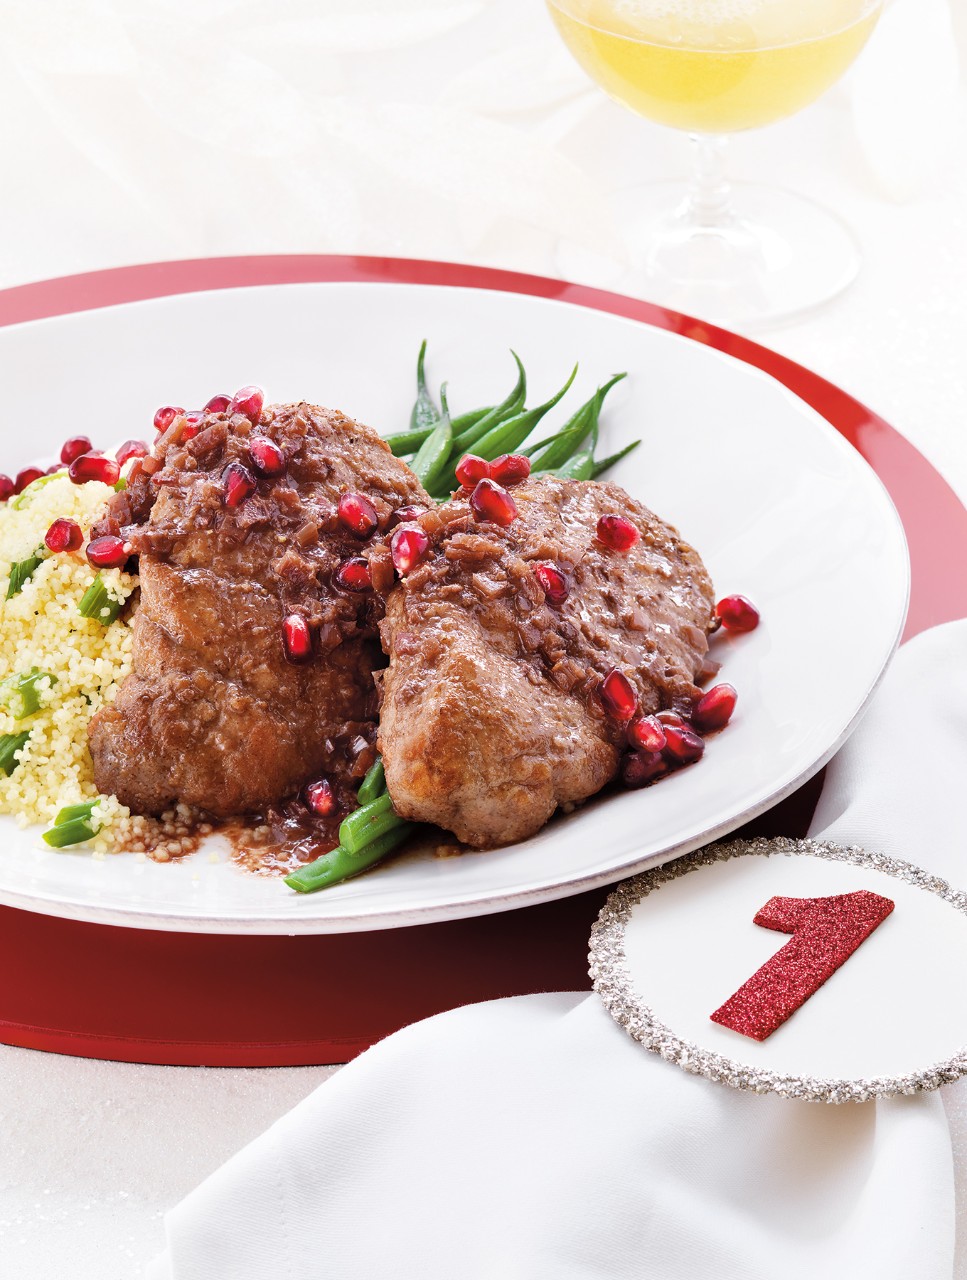 Pomegranate-Glazed Pork Medallions with Couscous